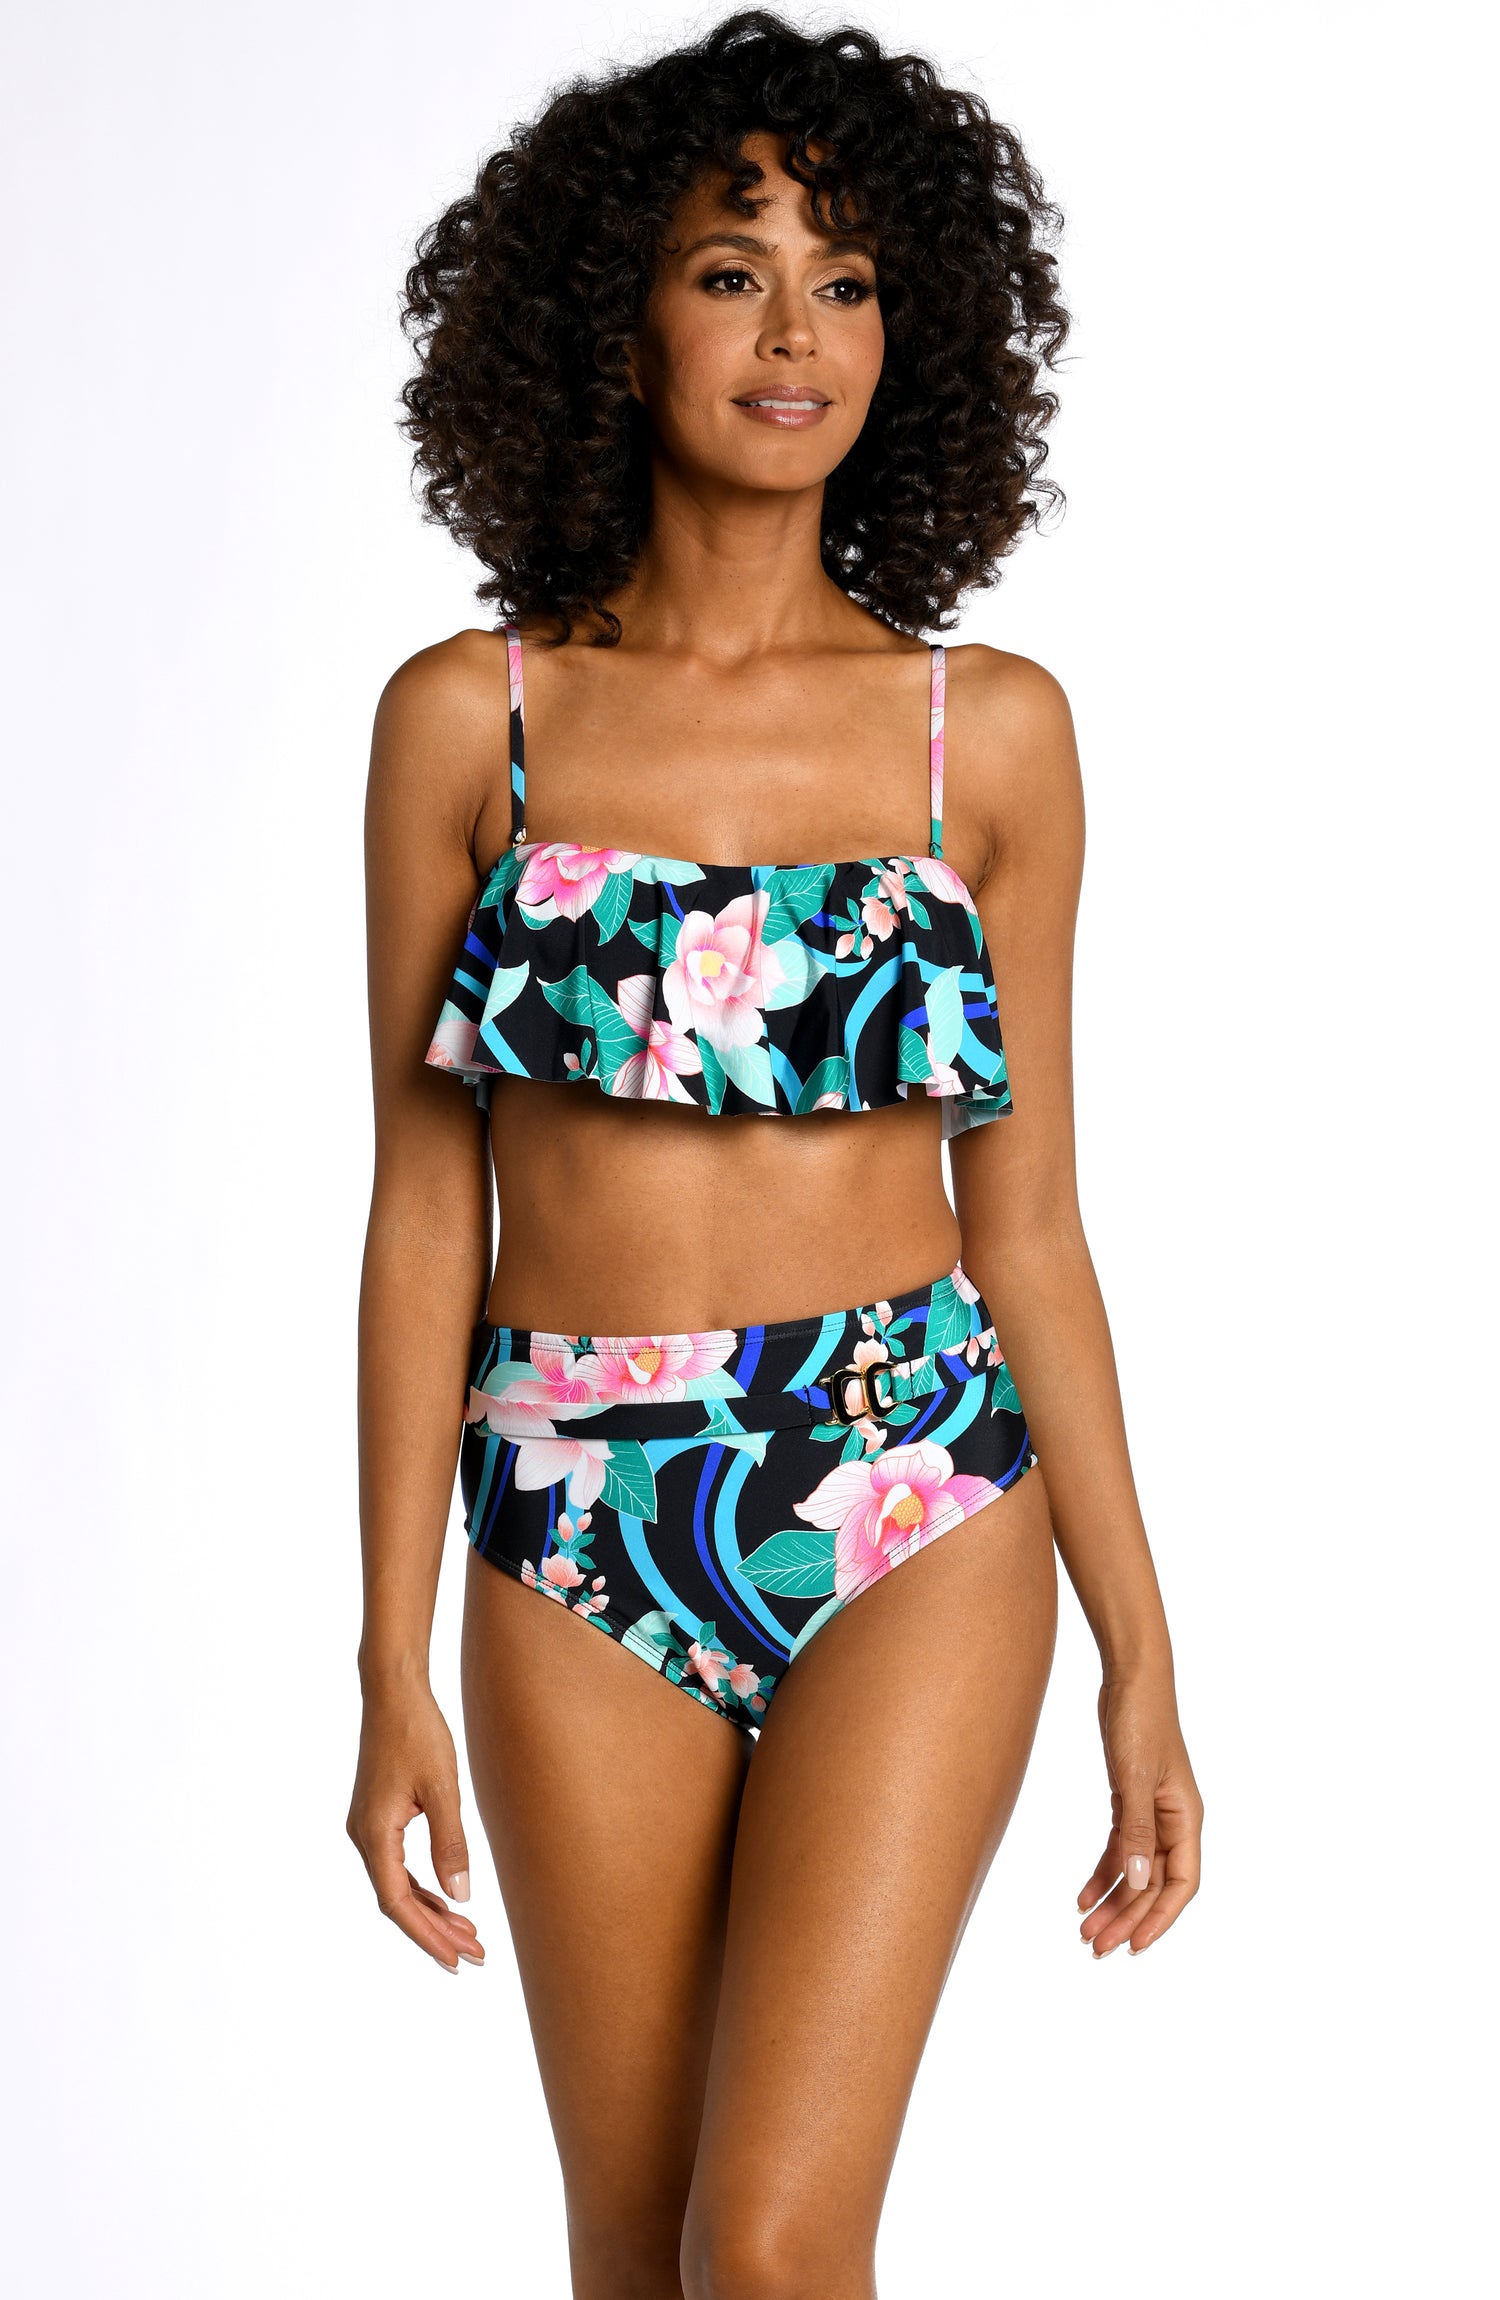 Model is wearing pink multi colored tropical foral print on this ruffle bandeau top from our Nightfall Blooms collection!